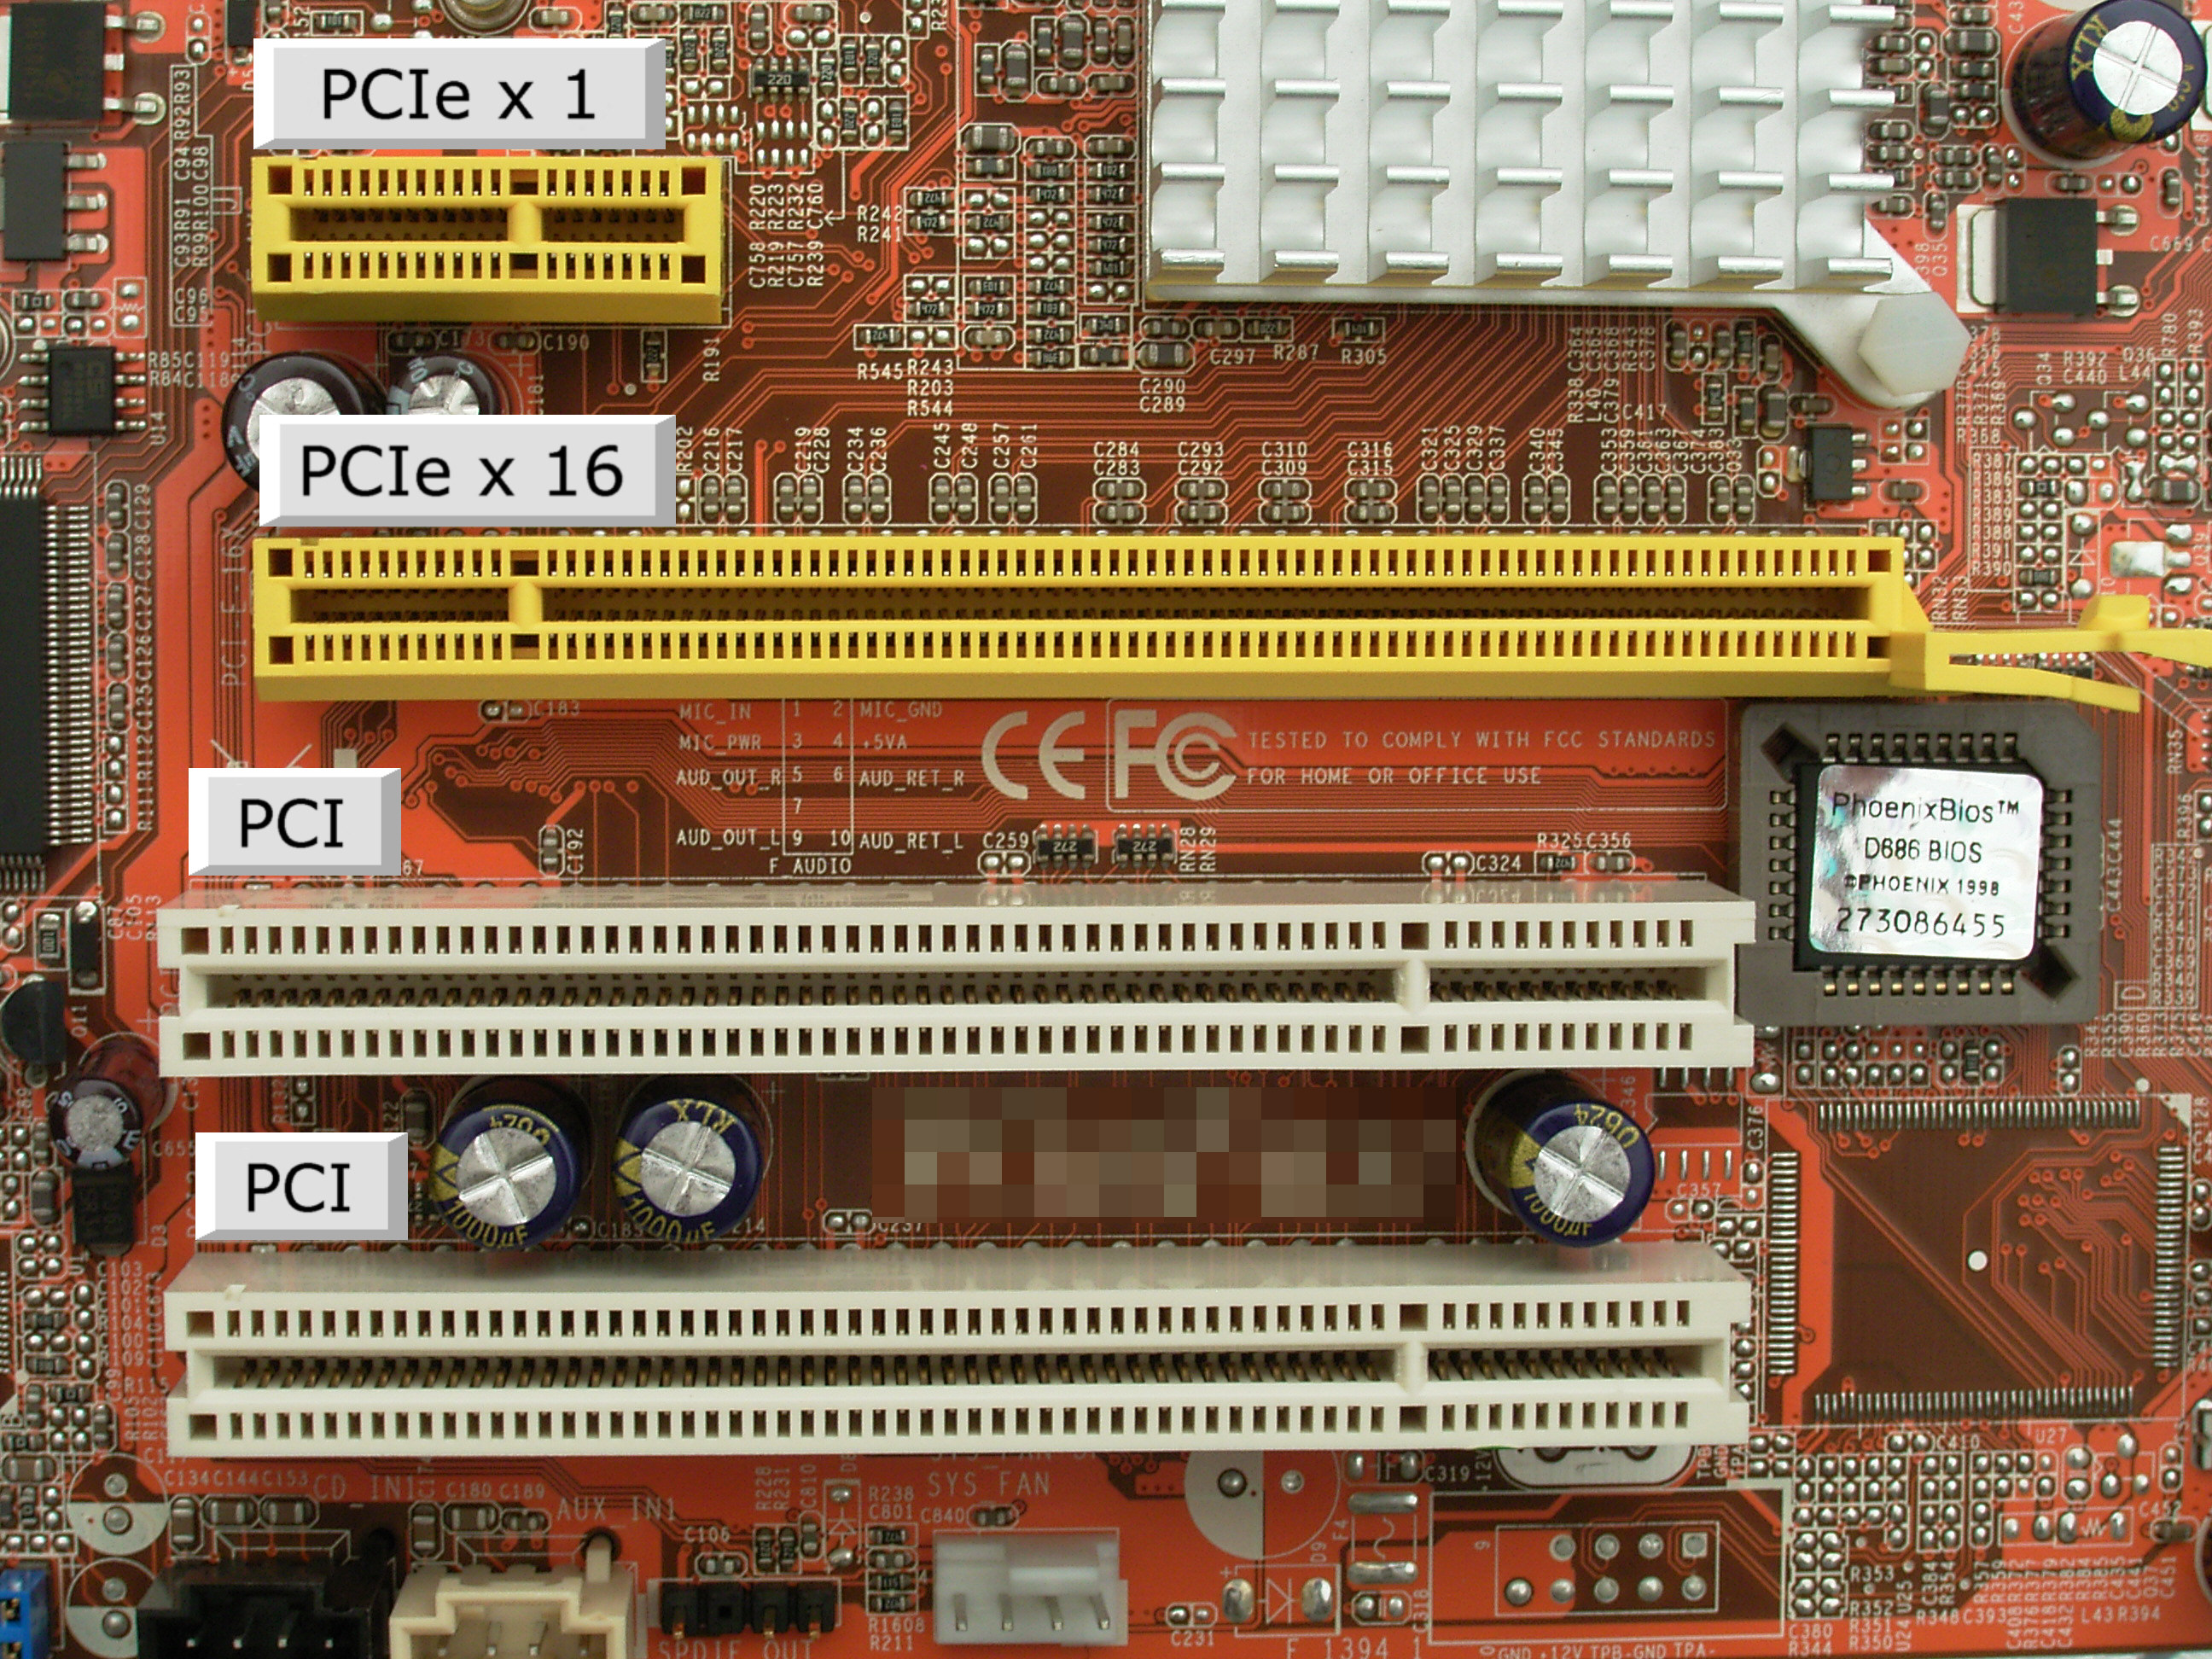 PCIe and PCI slots